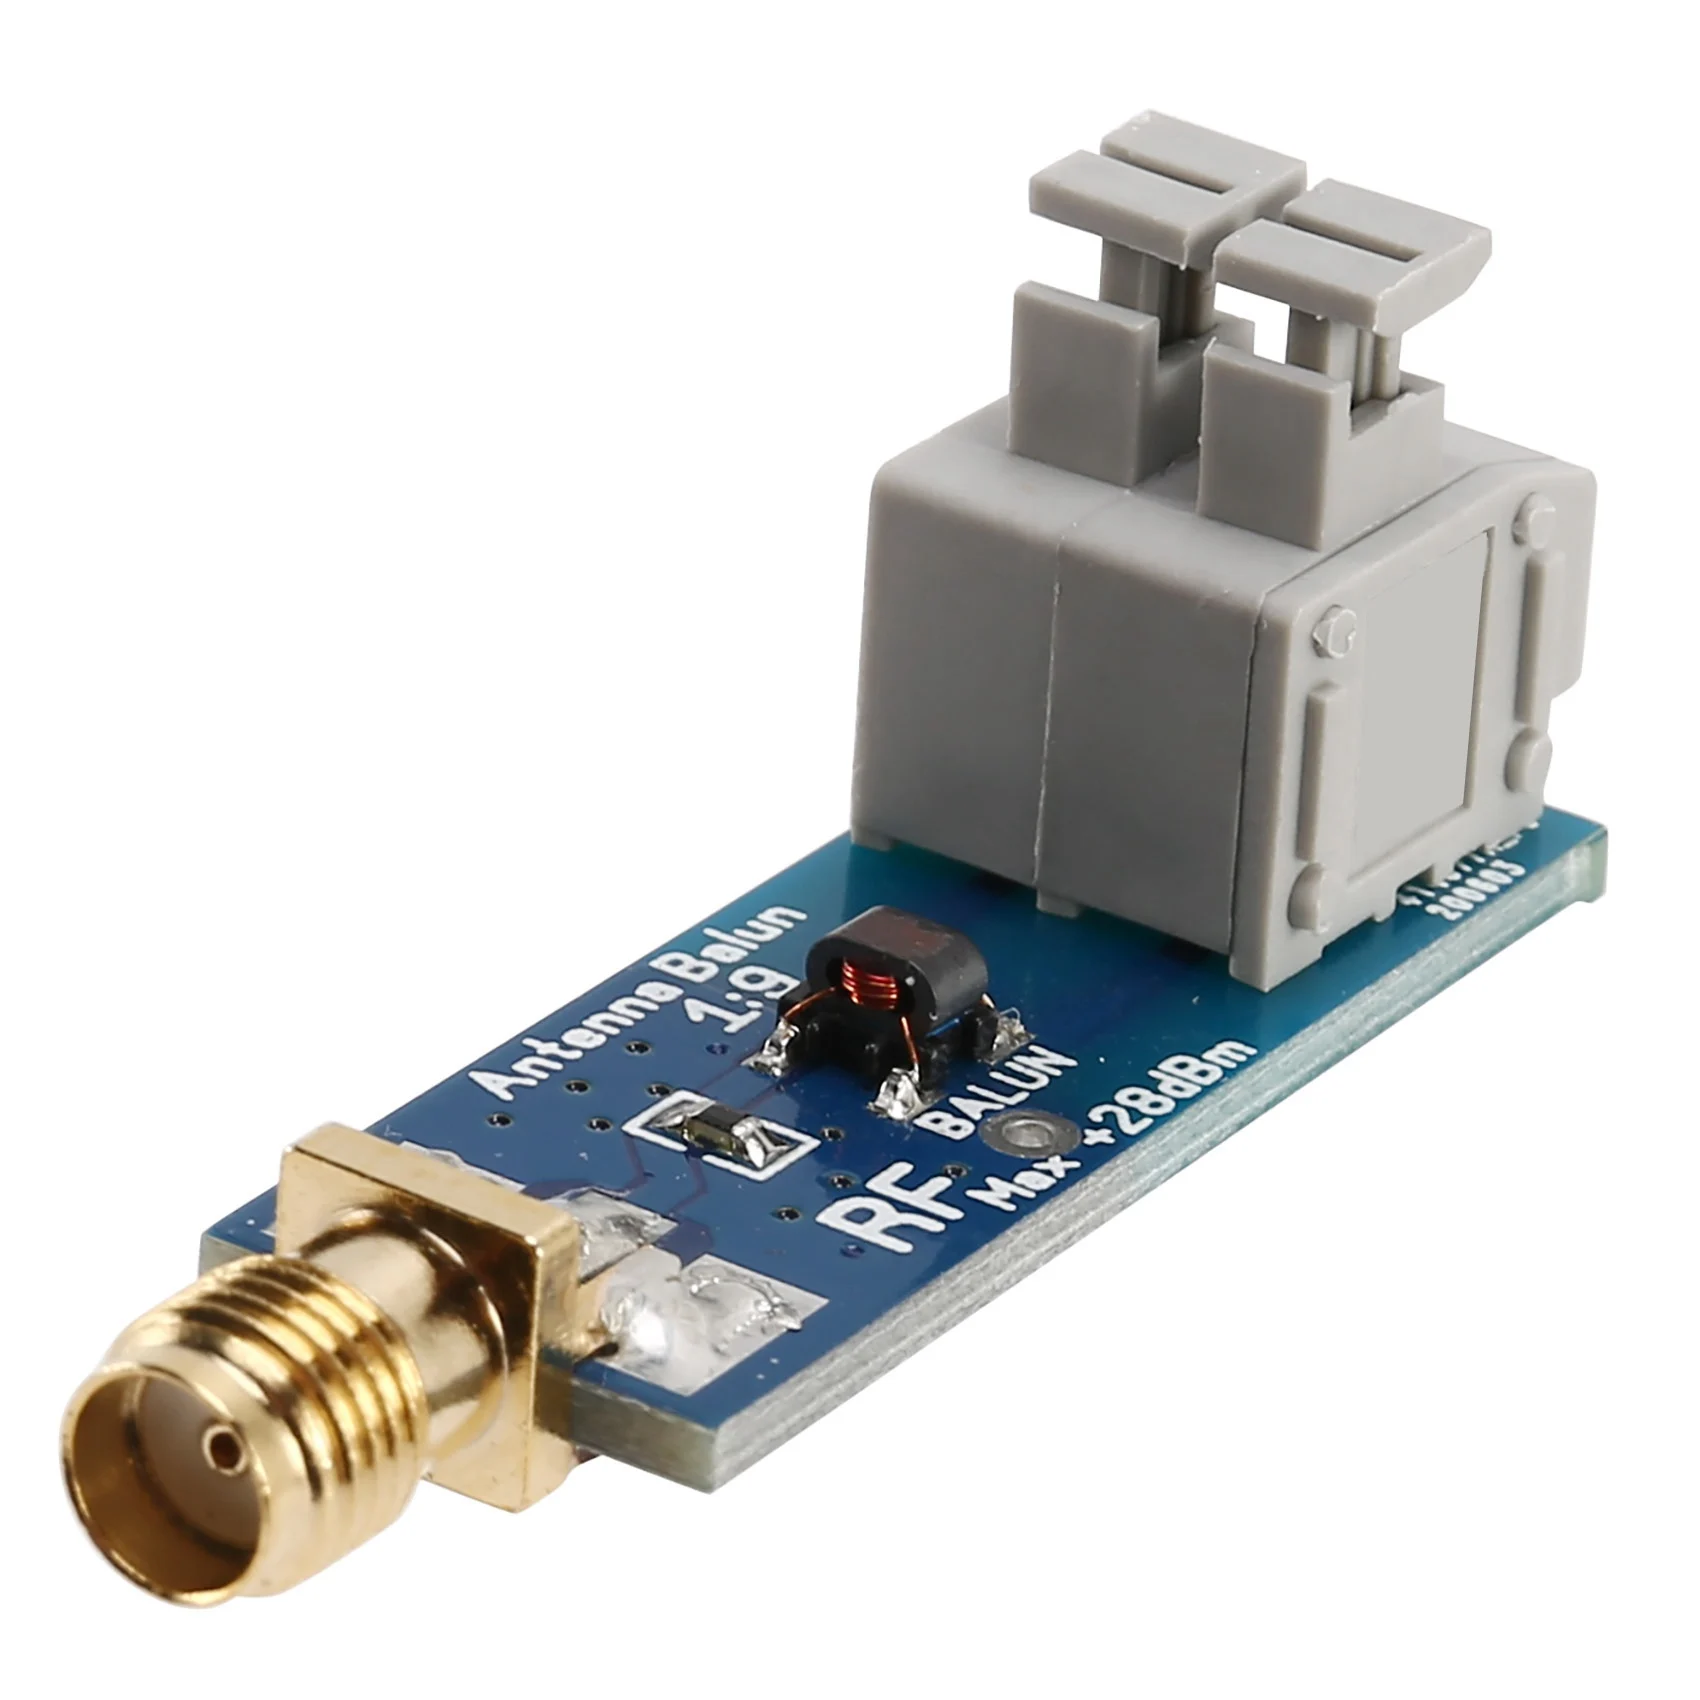 

Balun One Nine Tiny Low Cost - 1: 9 HF Antenna Balun with Antenna Input Protection for Ham it up SDR and Many Other